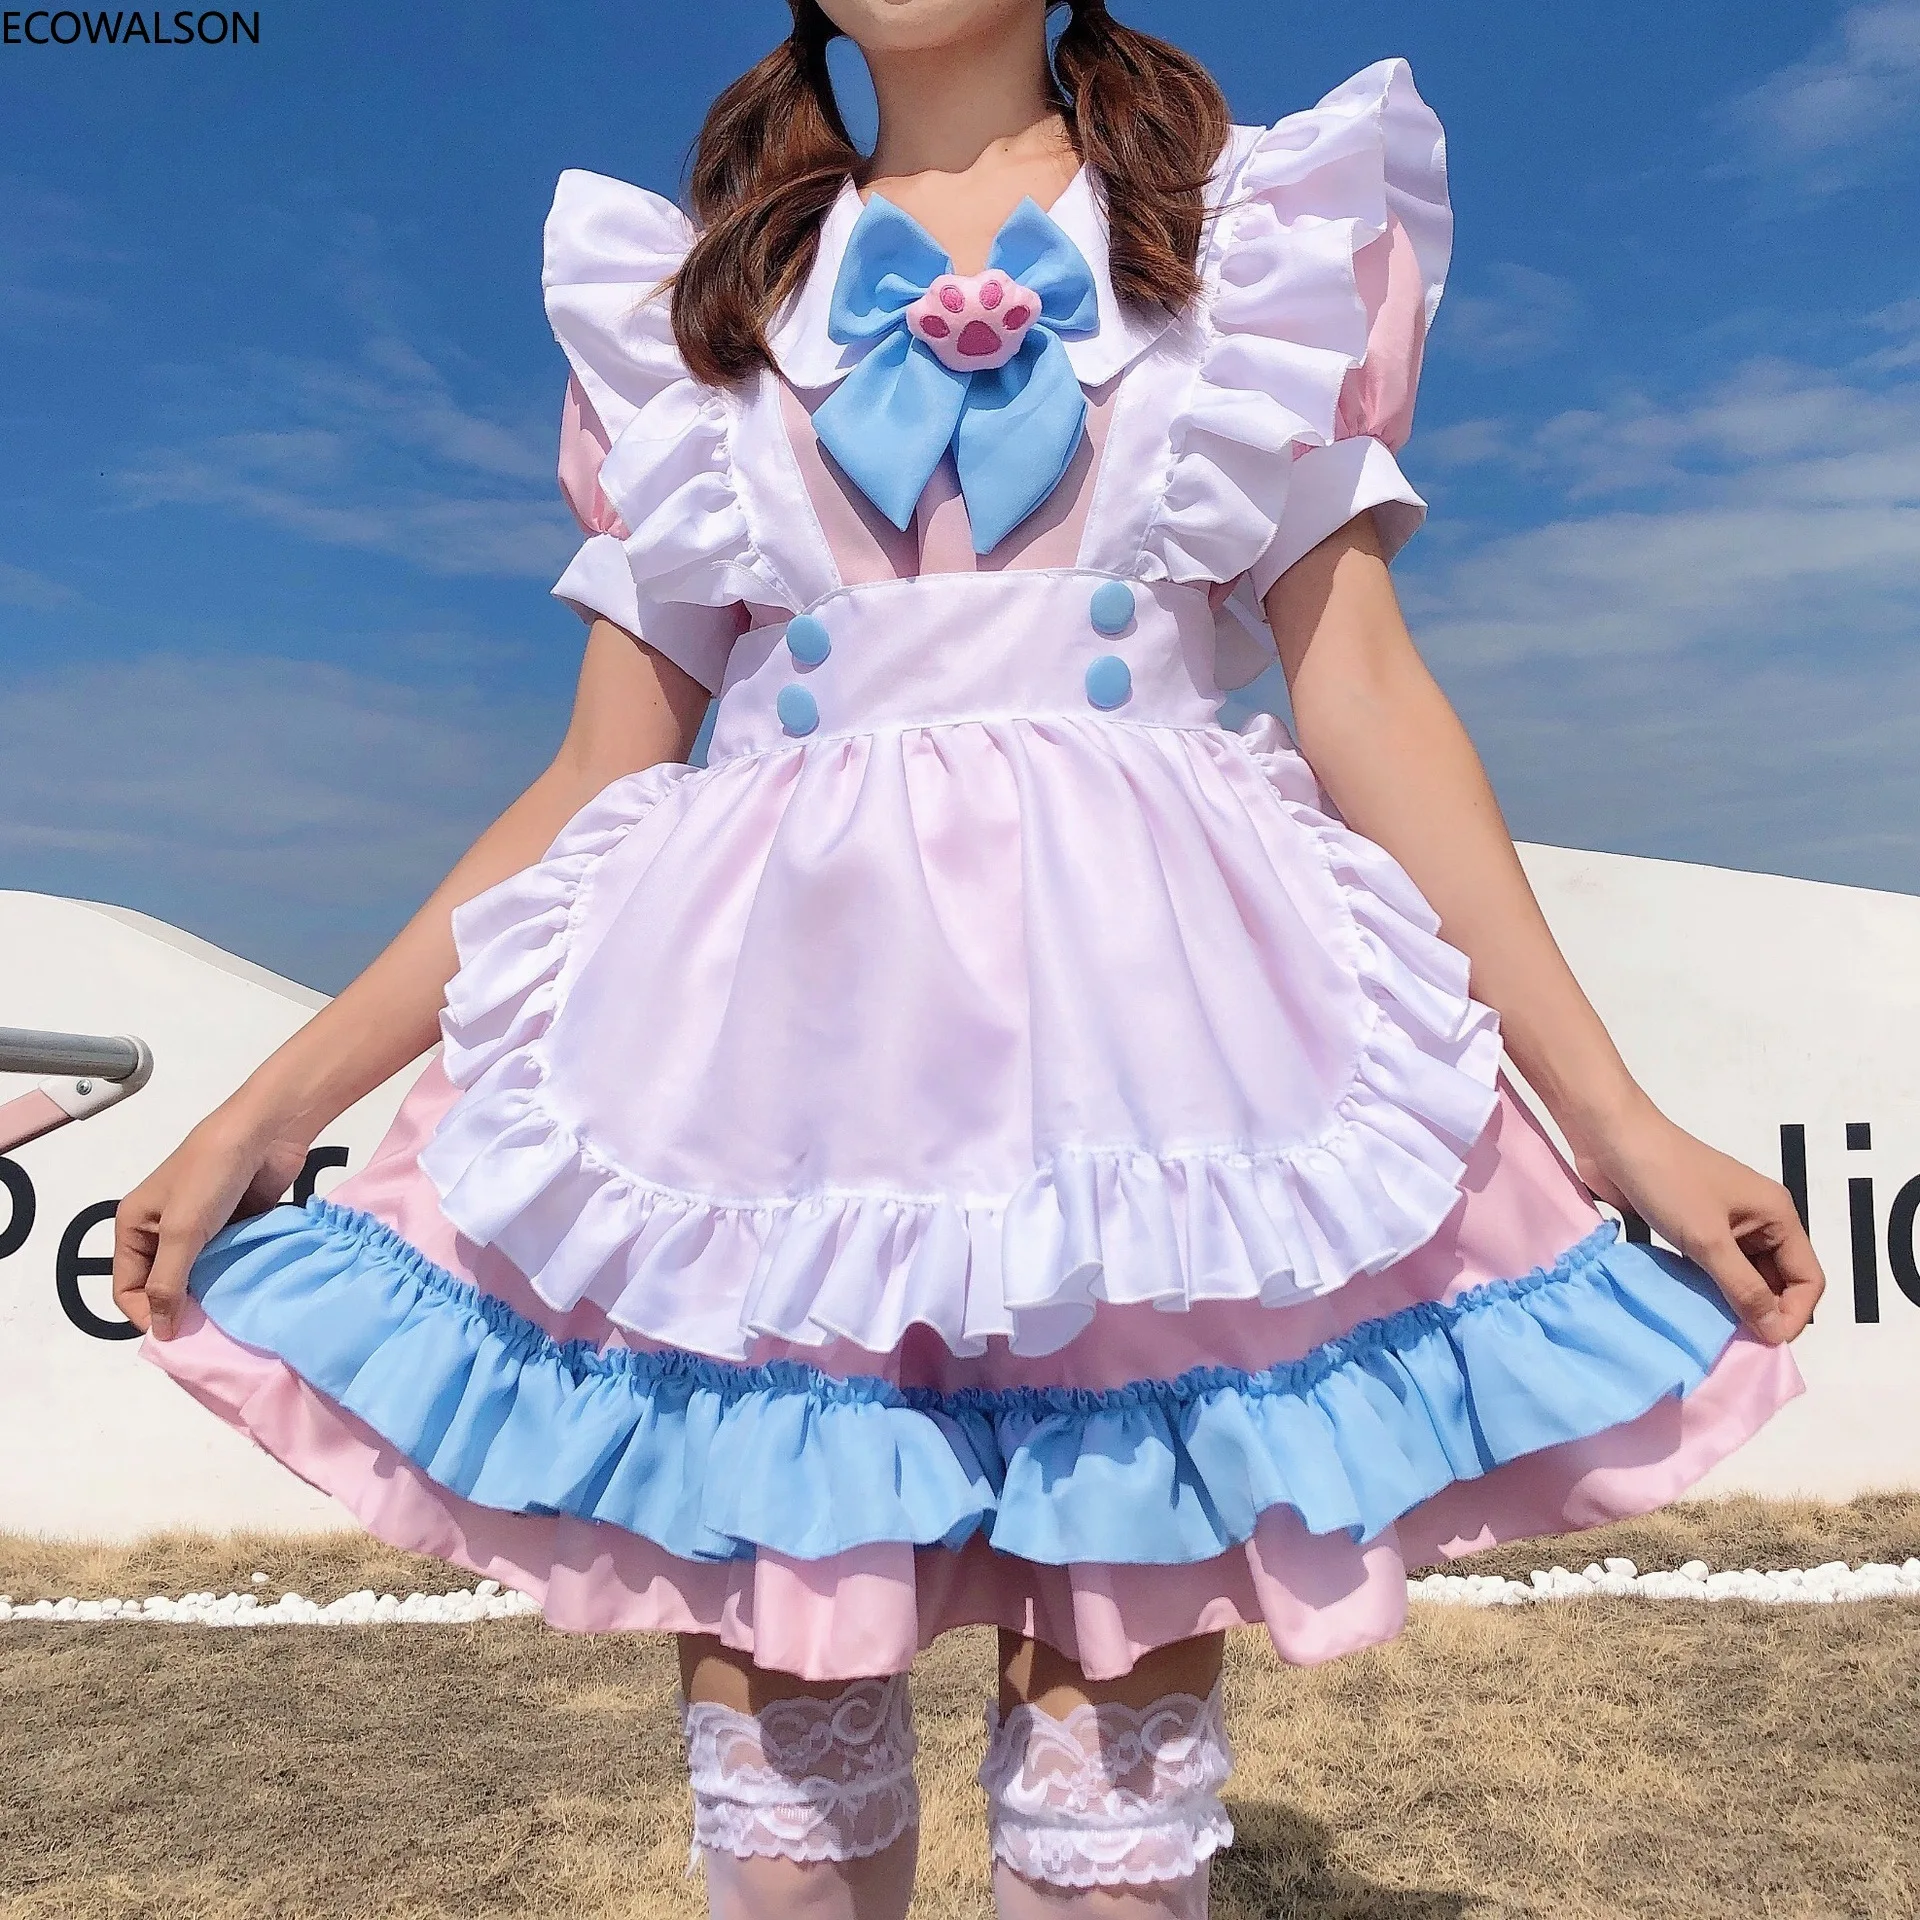 

Women Maid Outfit Anime Cute Cat Pink Blue Lace Trim Apron Cat paw Lolita Dresses Cosplay Costume Full set plus size 4XL